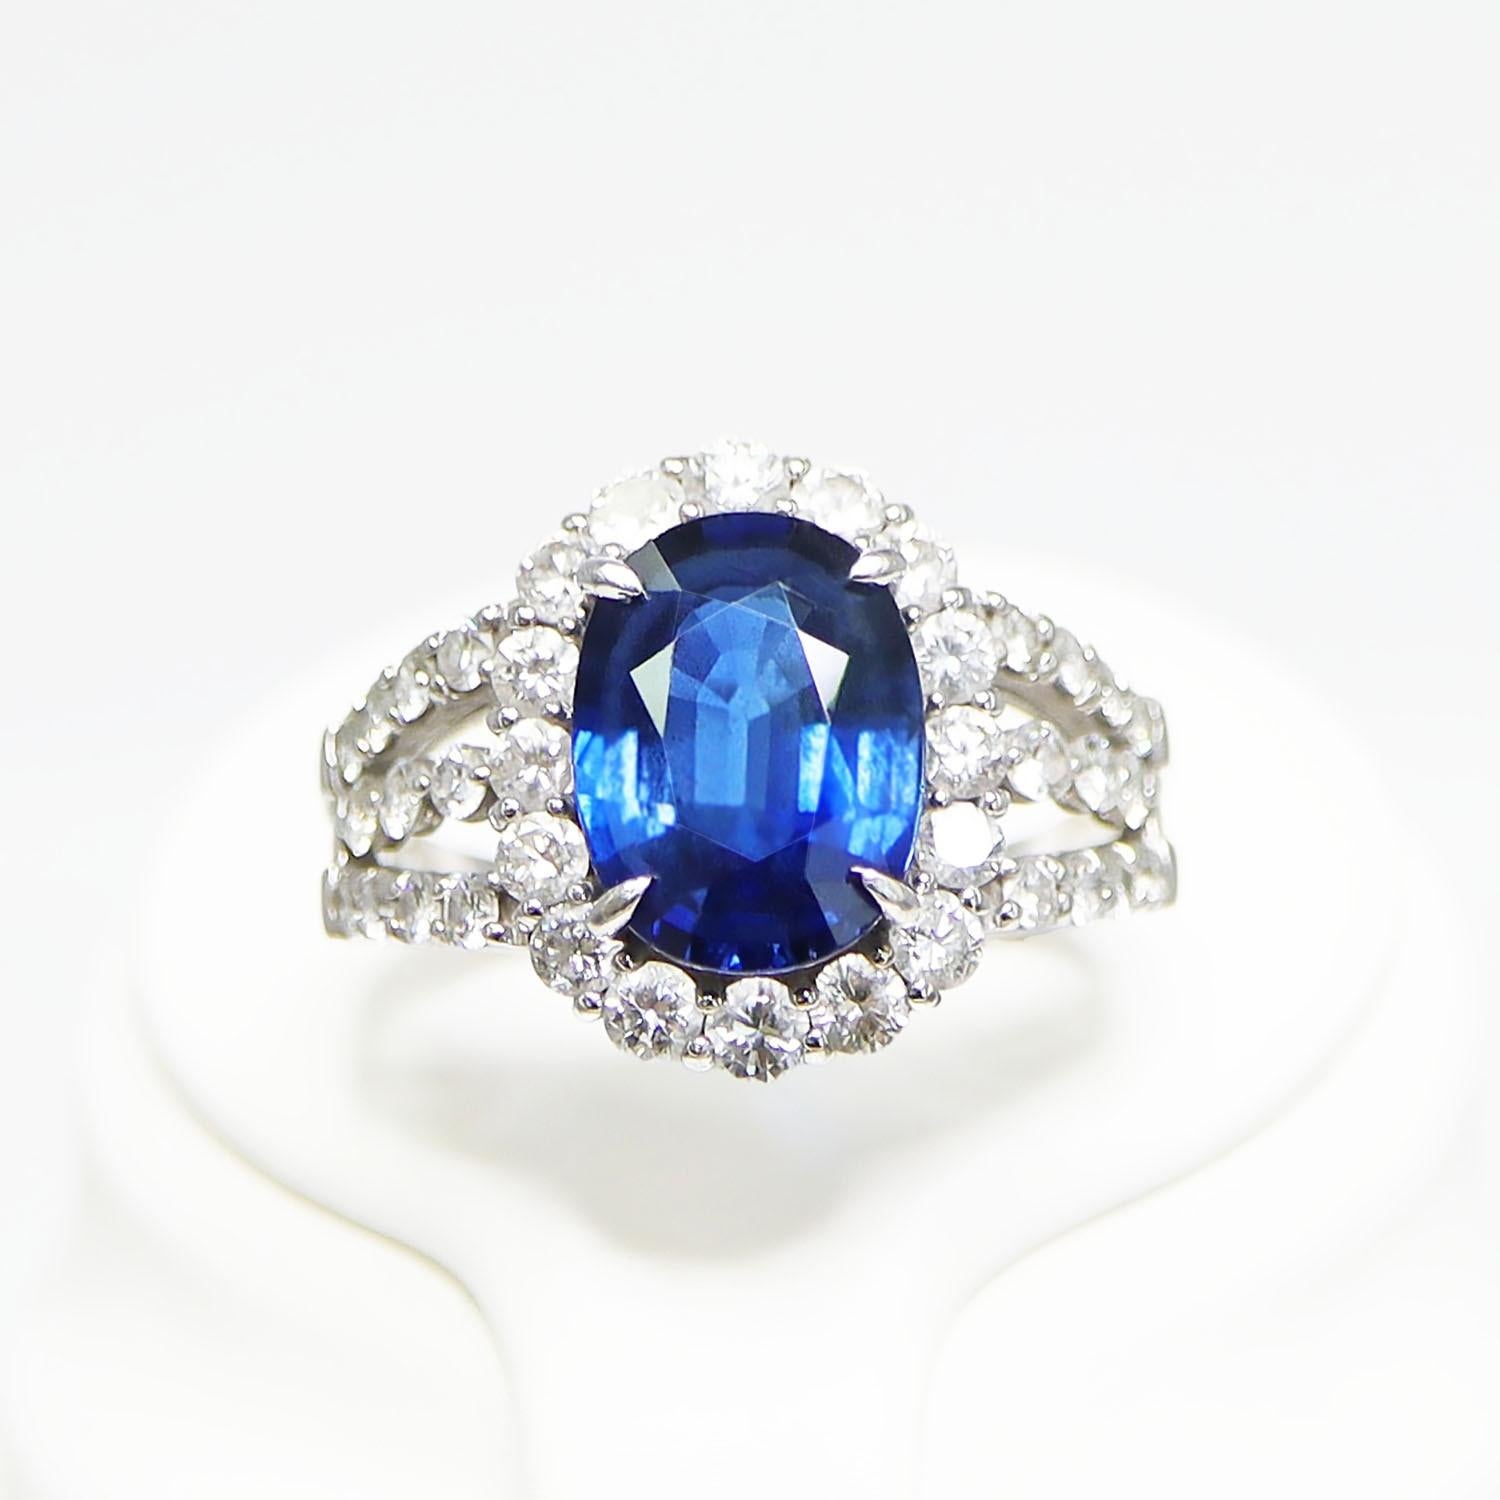 Oval Cut Certified PT950 4.82 ct Unheated Royal Blue Sapphire Engagement Ring For Sale